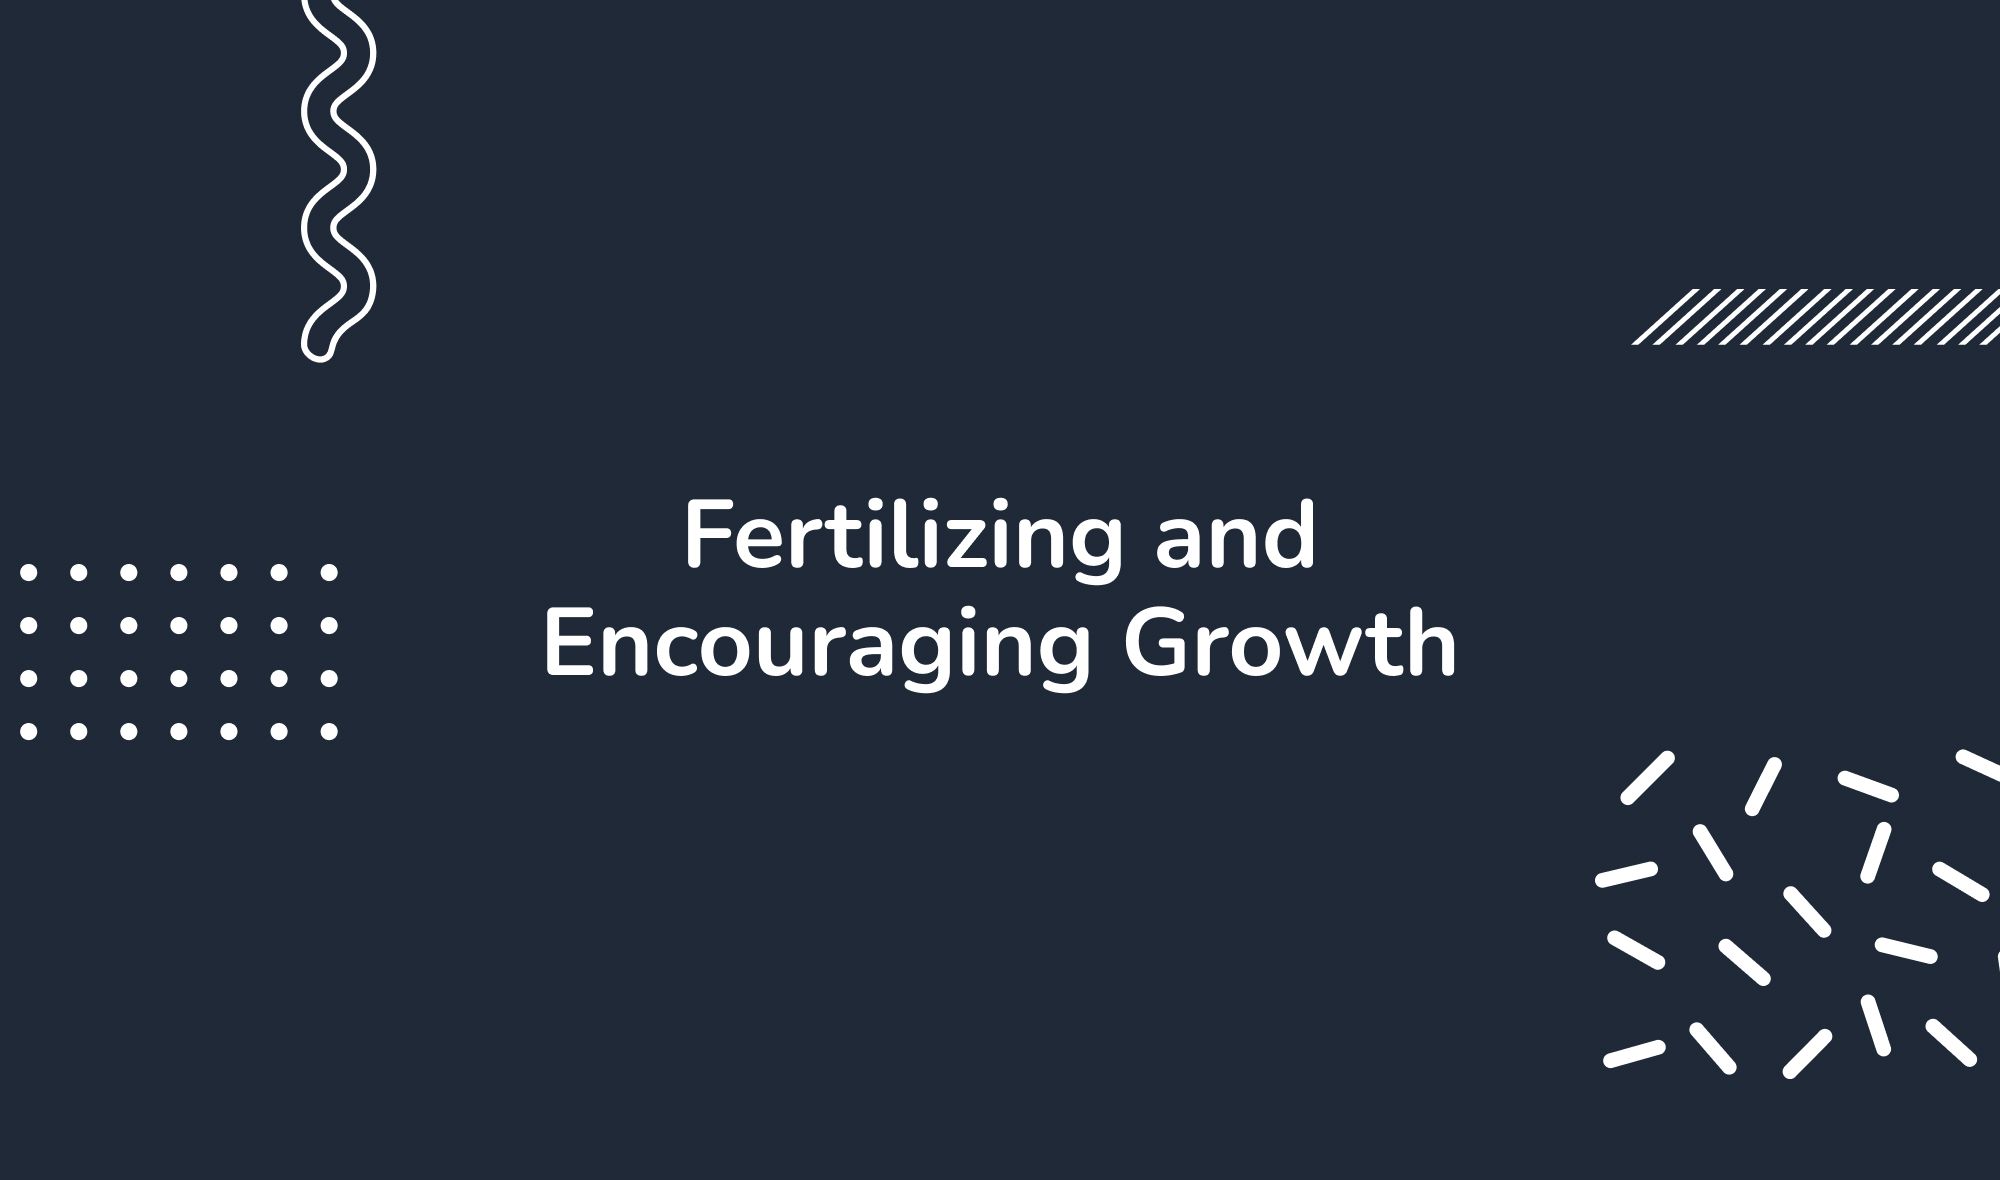 Fertilizing and Encouraging Growth